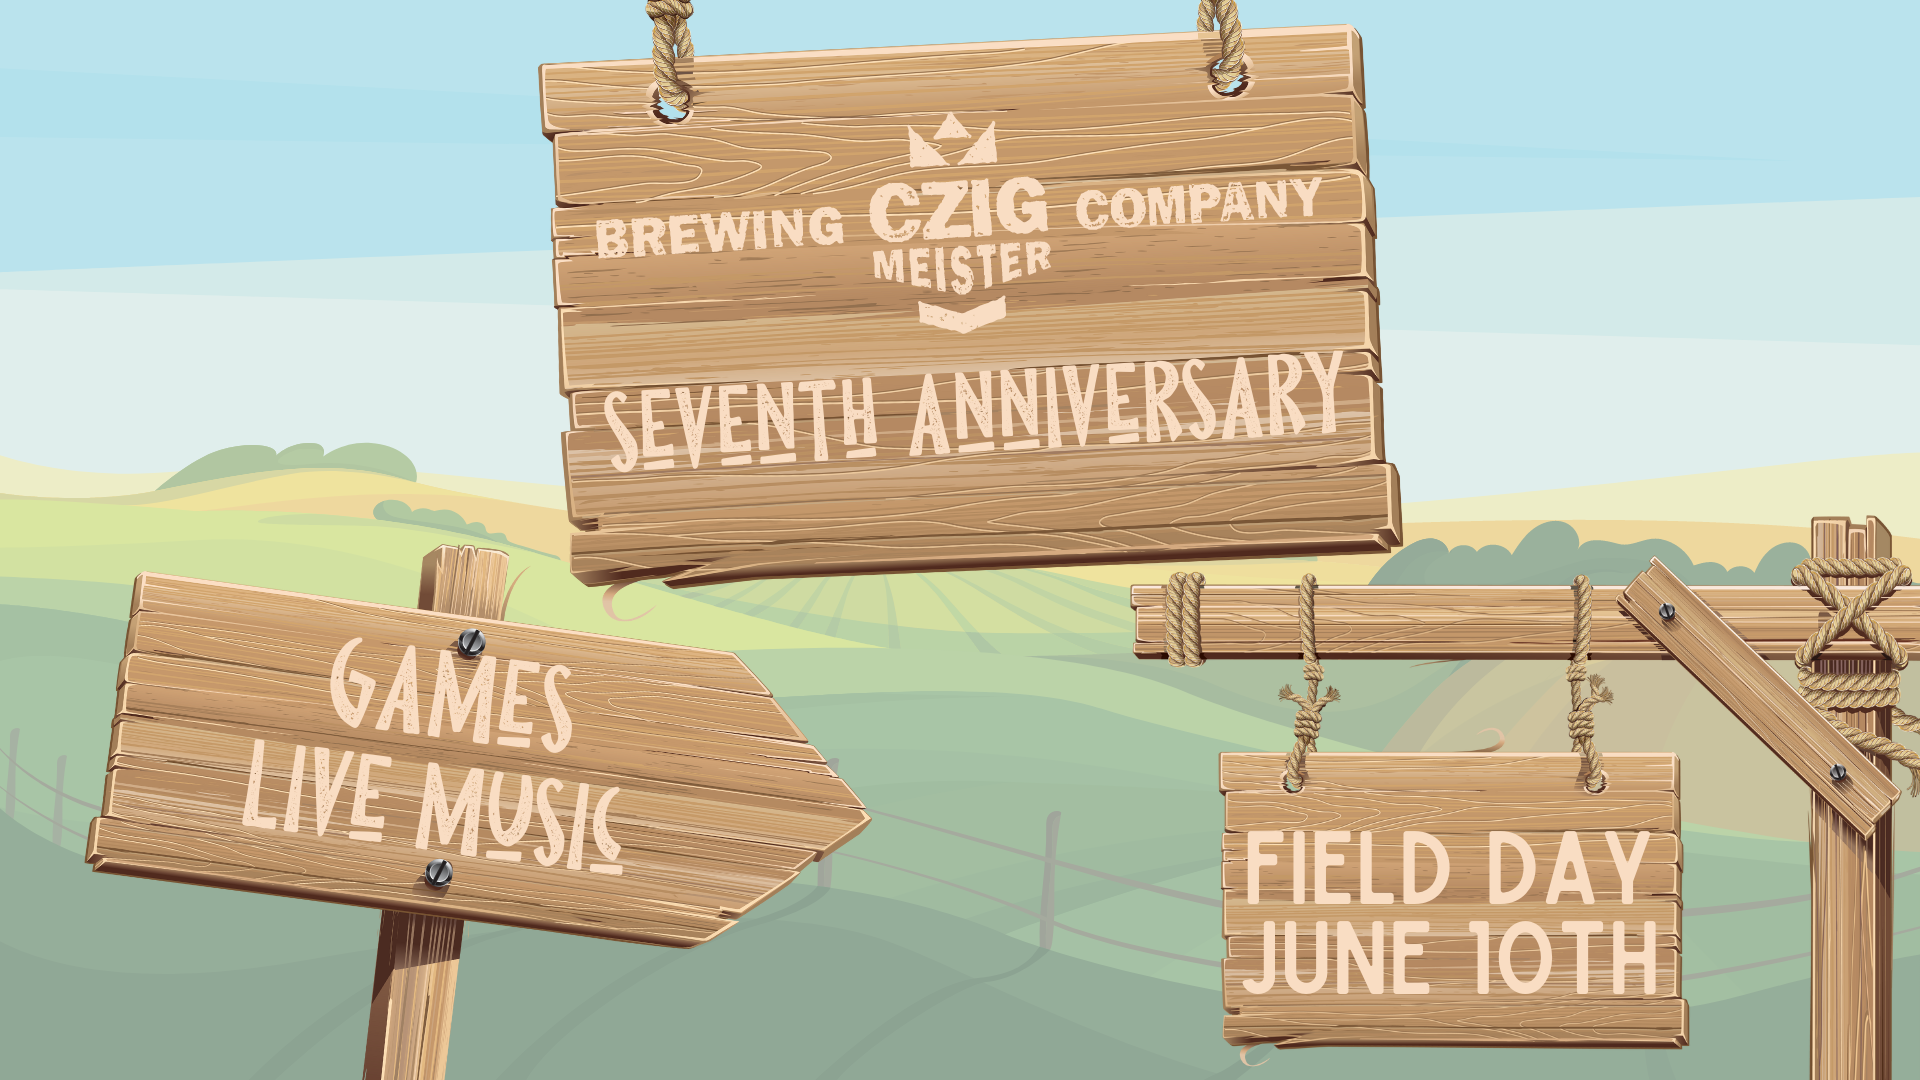 Czig Meister Brewing Company's 7th Anniversary featuring live music and field day games